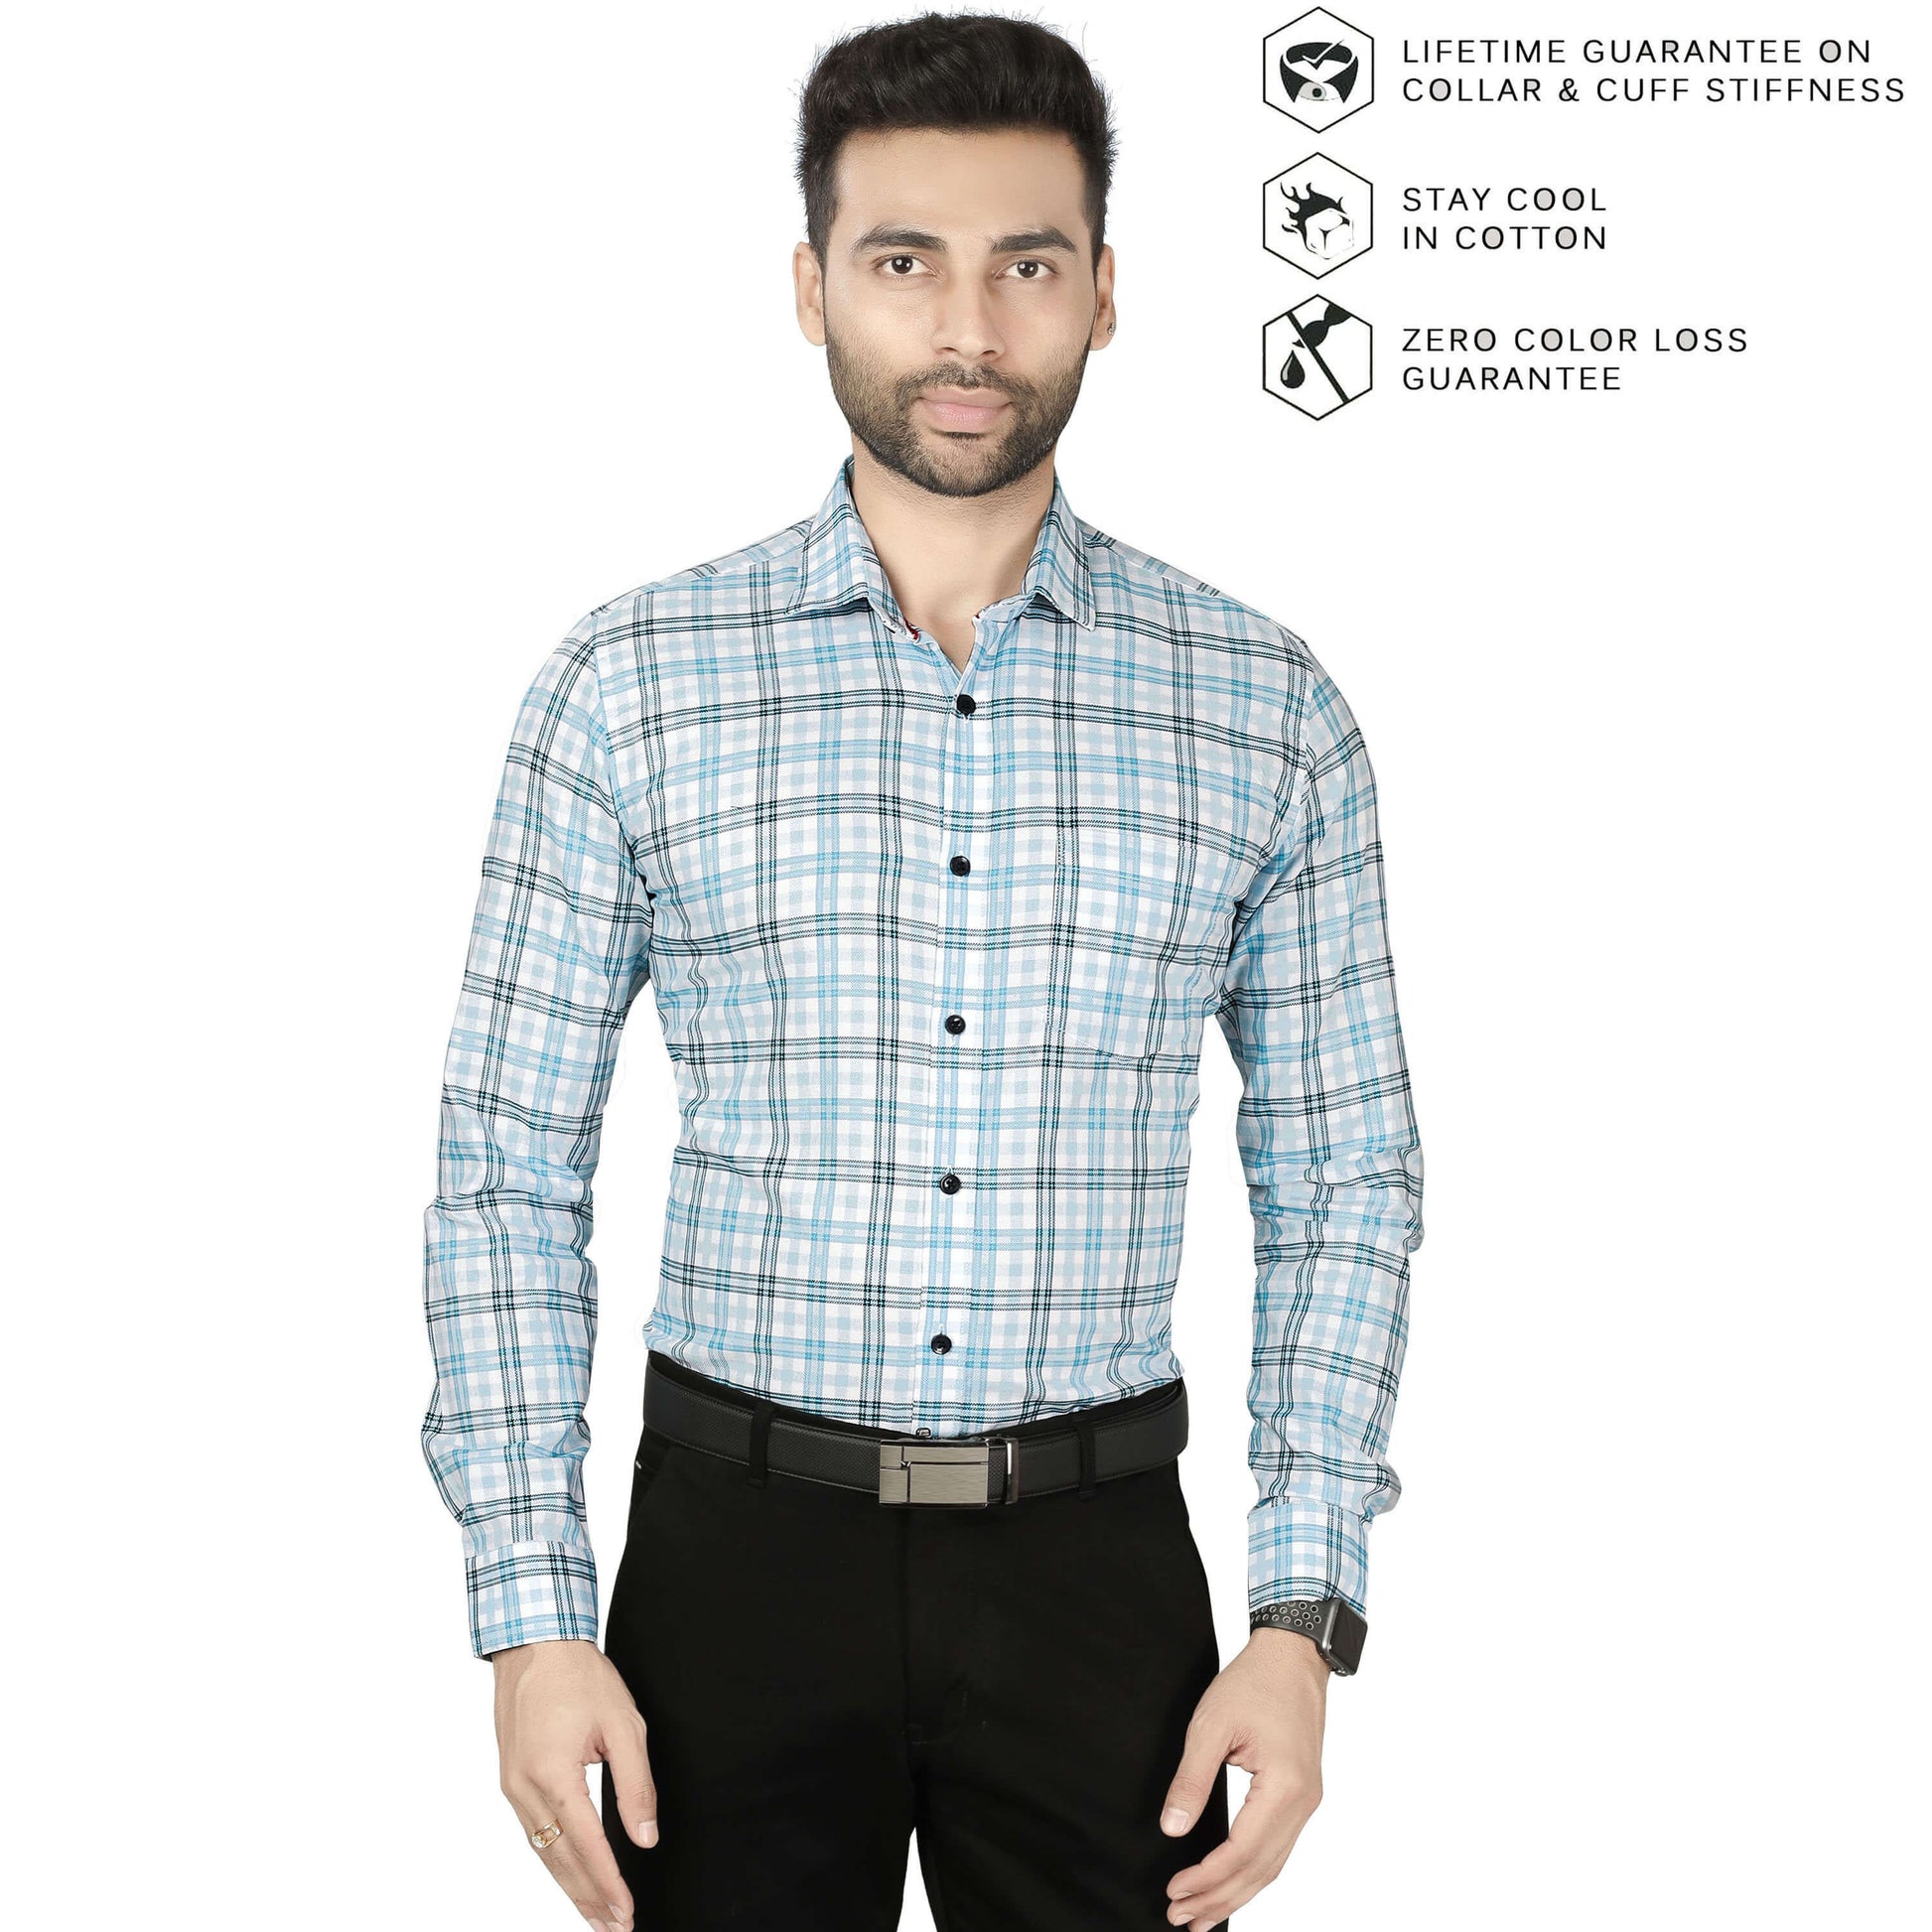 5thanfold Men's Formal Pure Cotton Full Sleeve Checkered Sky blue Slim Fit Shirt